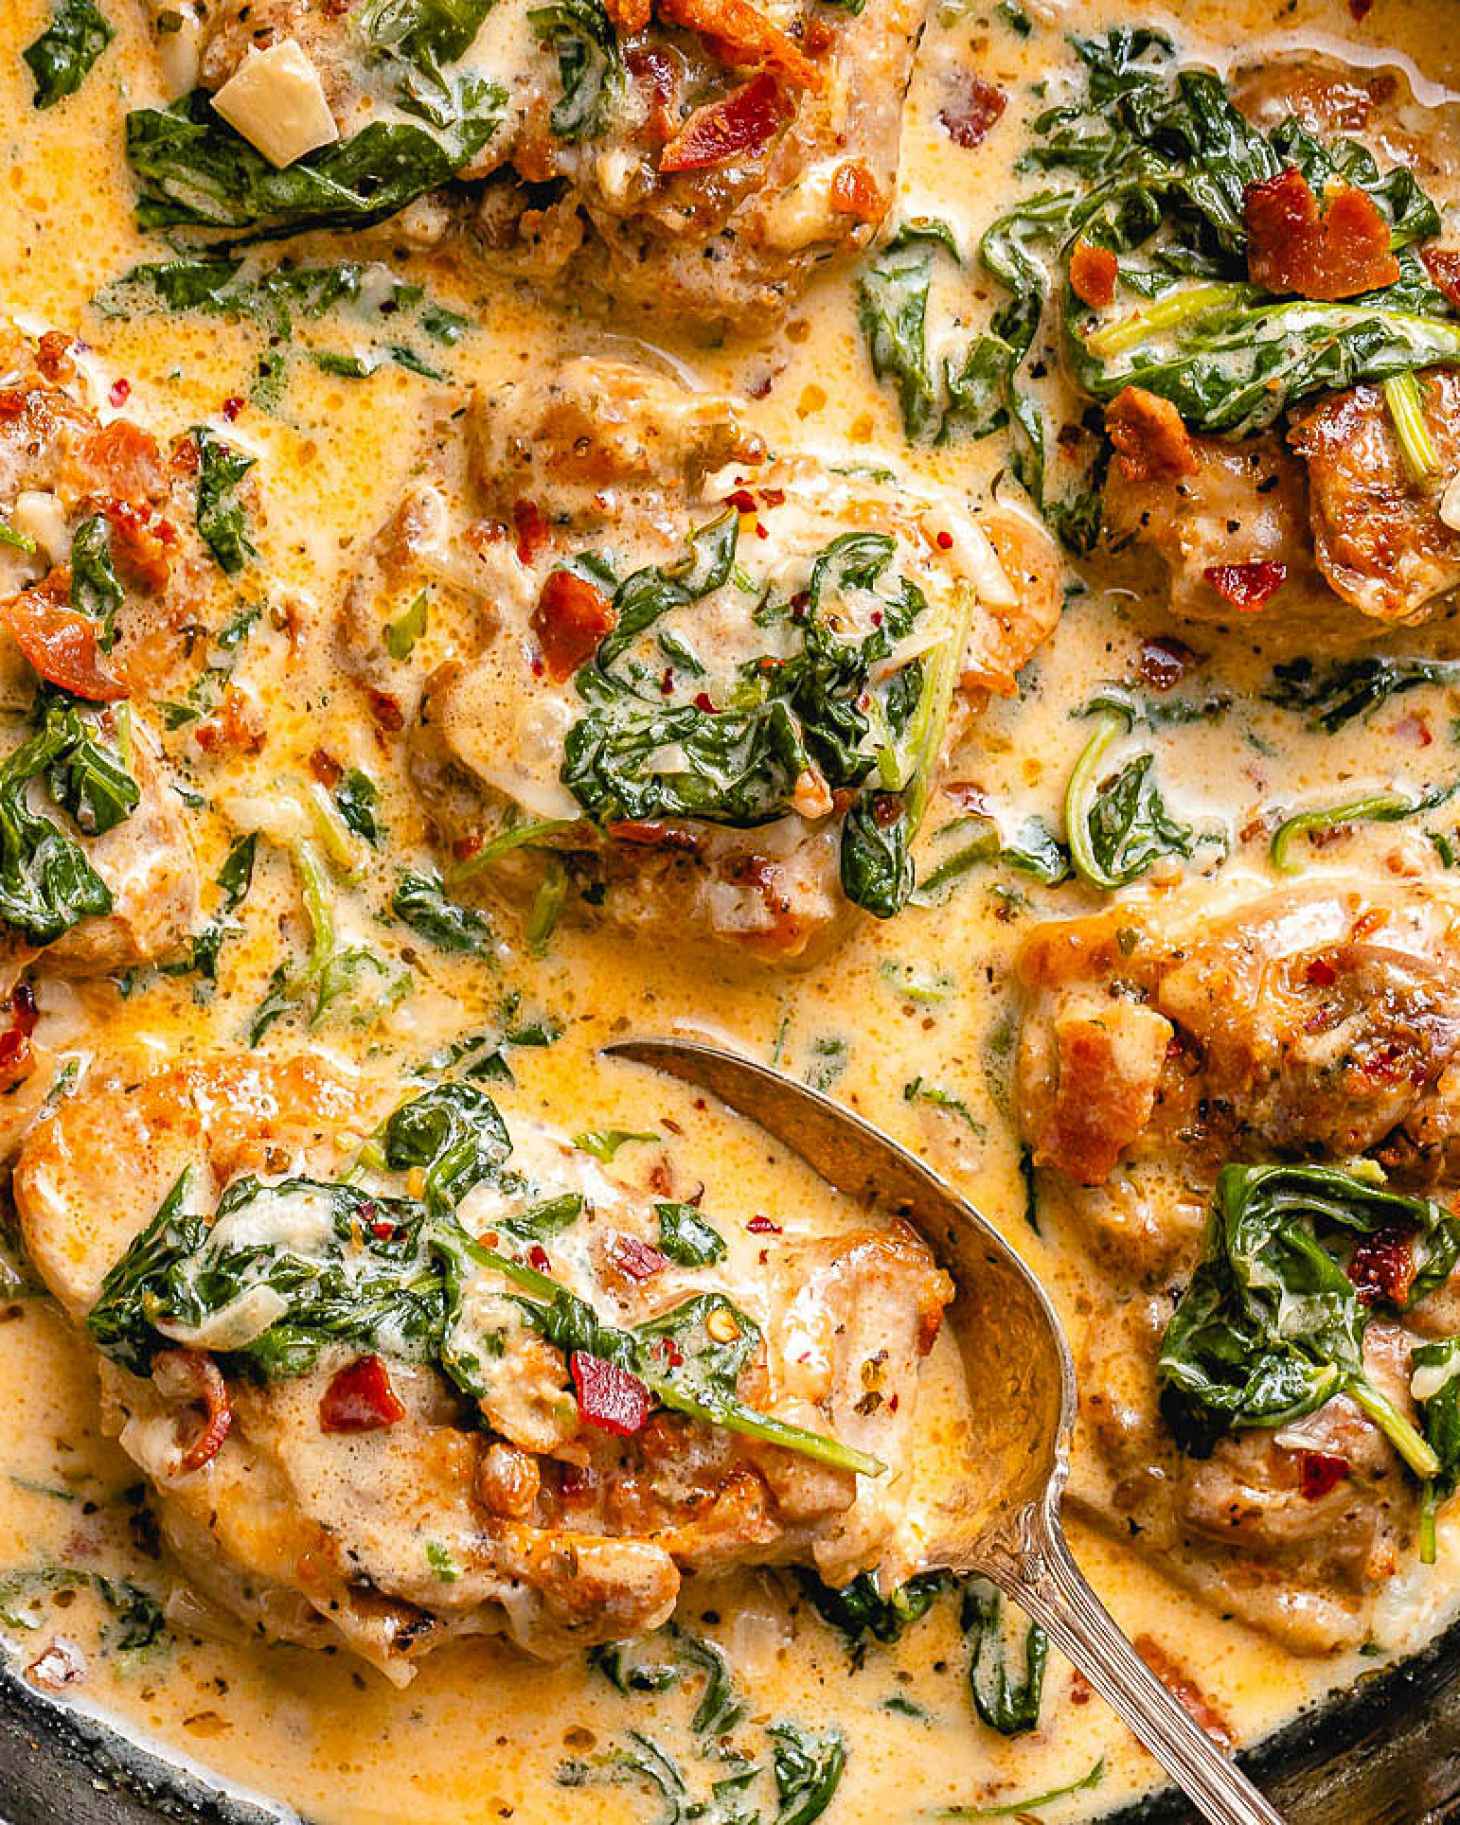 Skillet Chicken Recipes: 20 Quick and Easy Skillet Chicken Recipes for ...